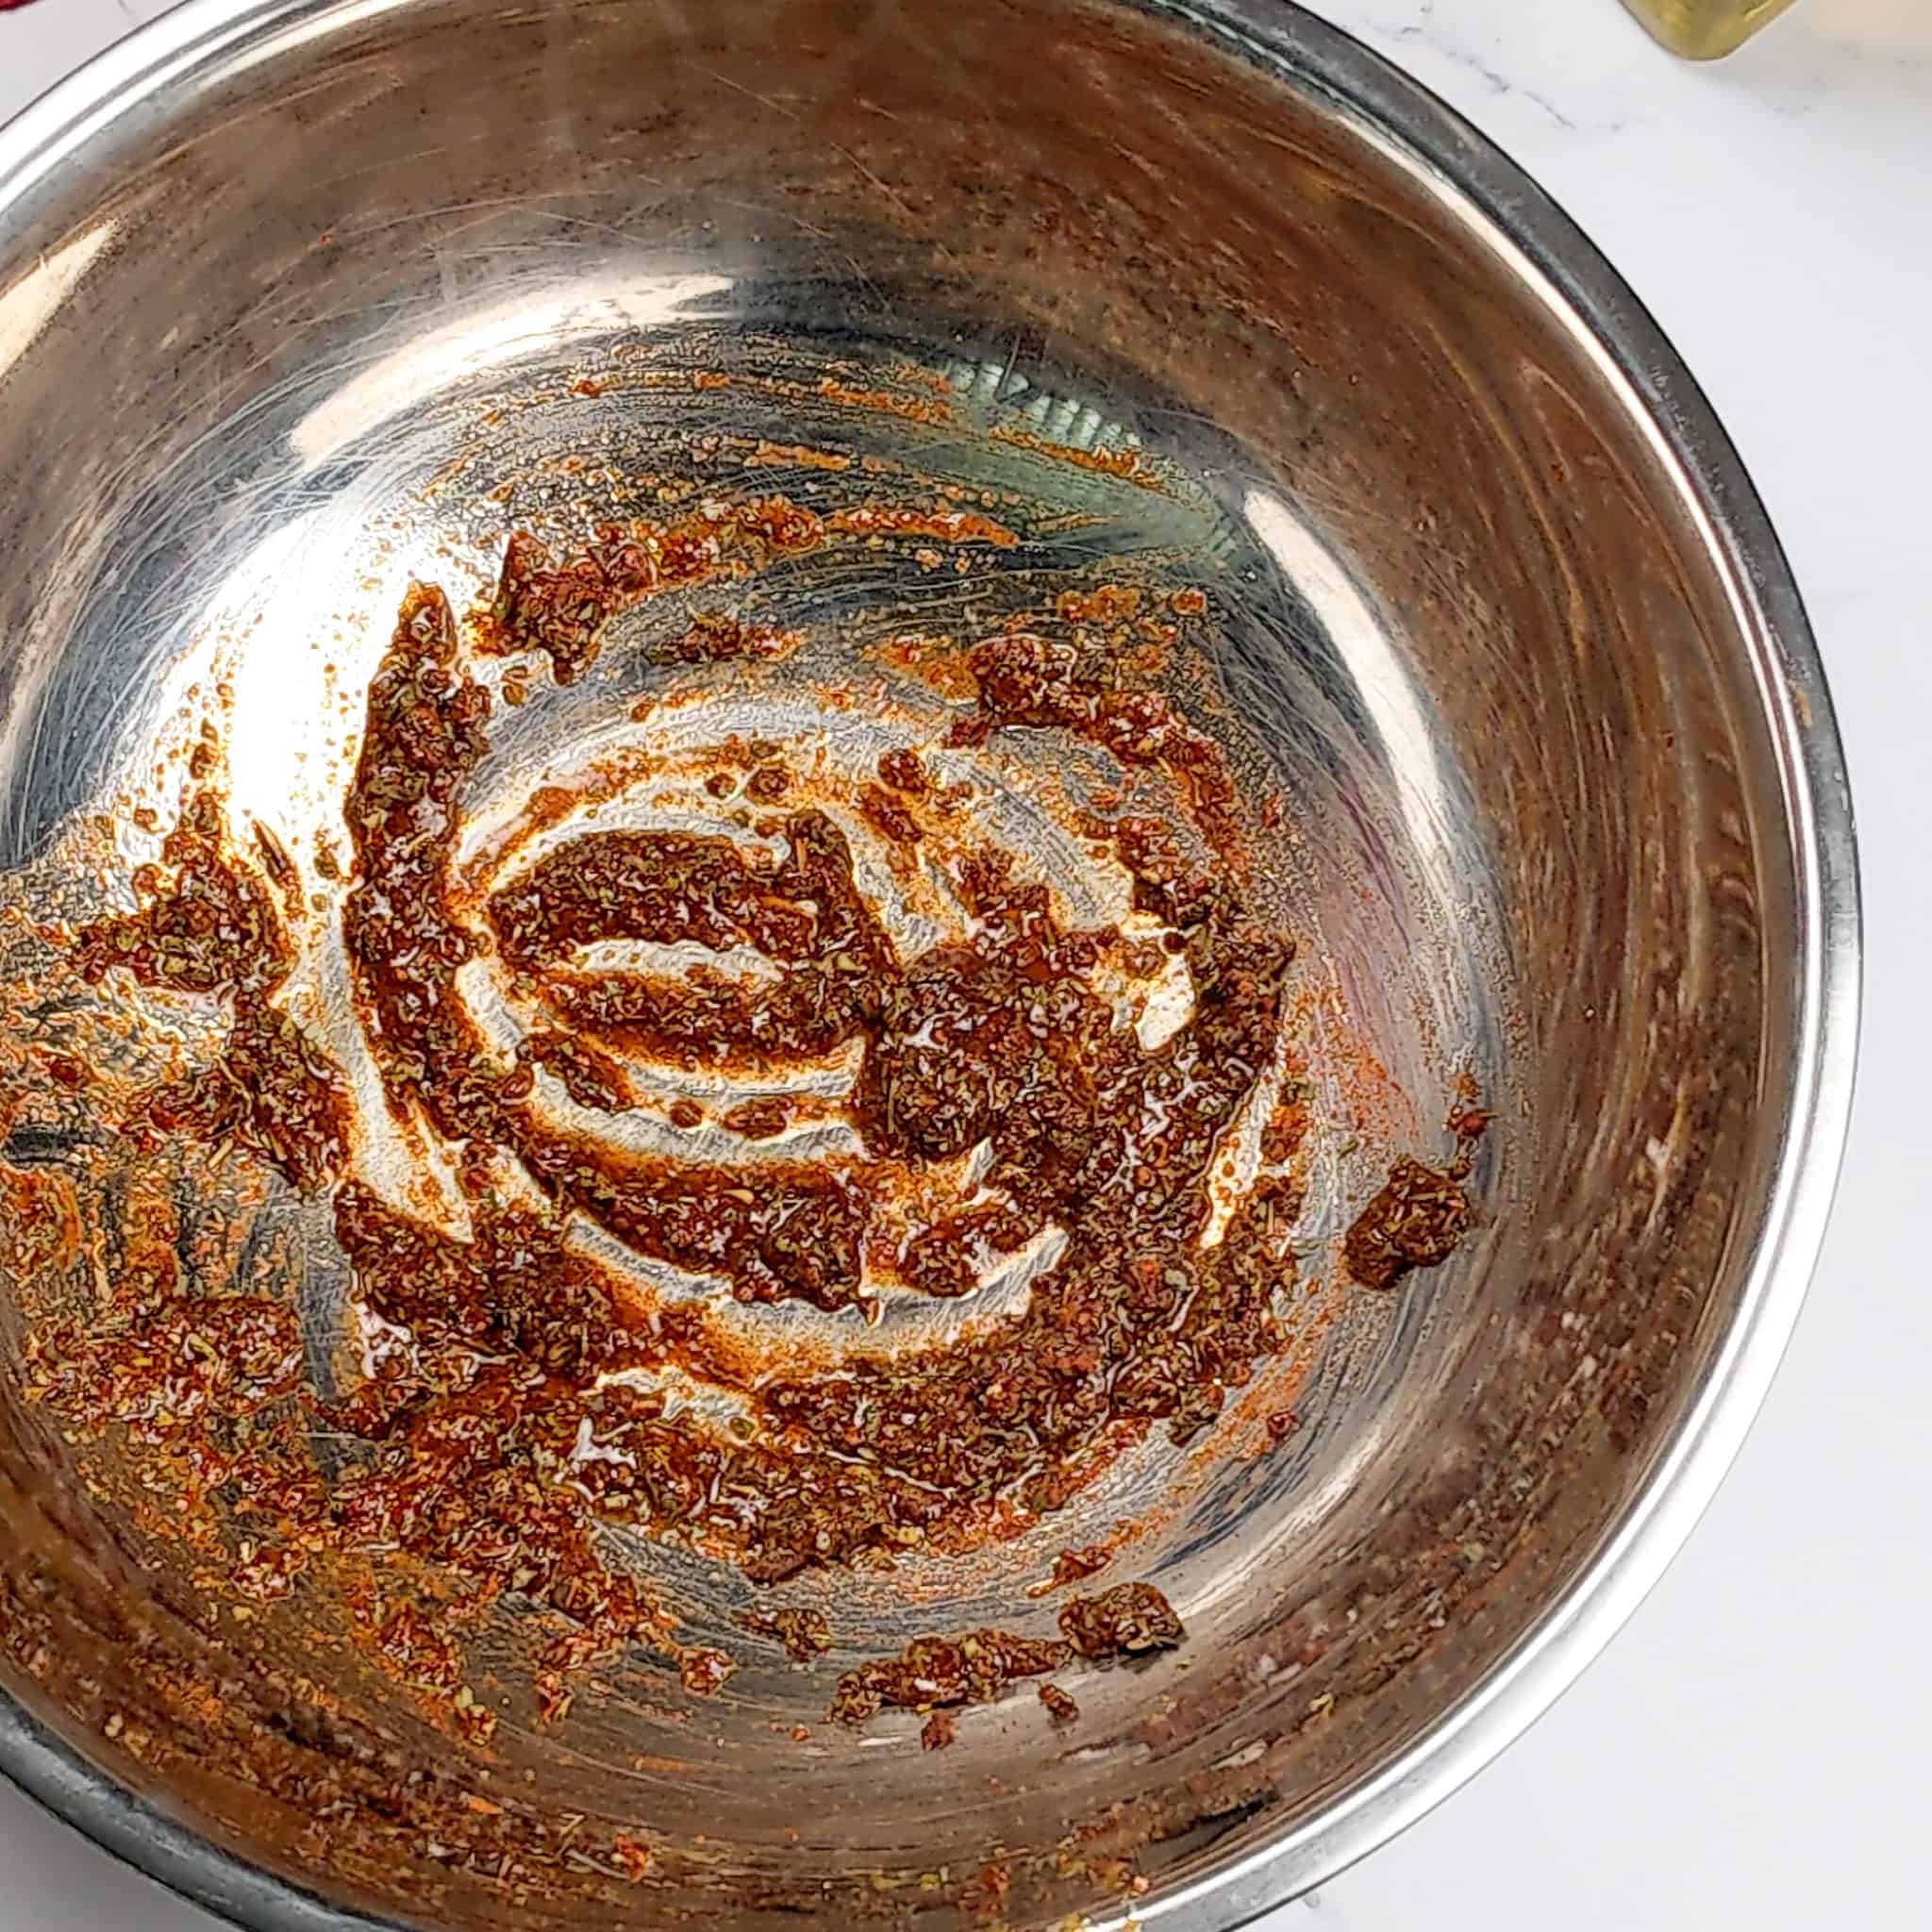 wet rub mixture in a large wide stainless steel mixing bowl